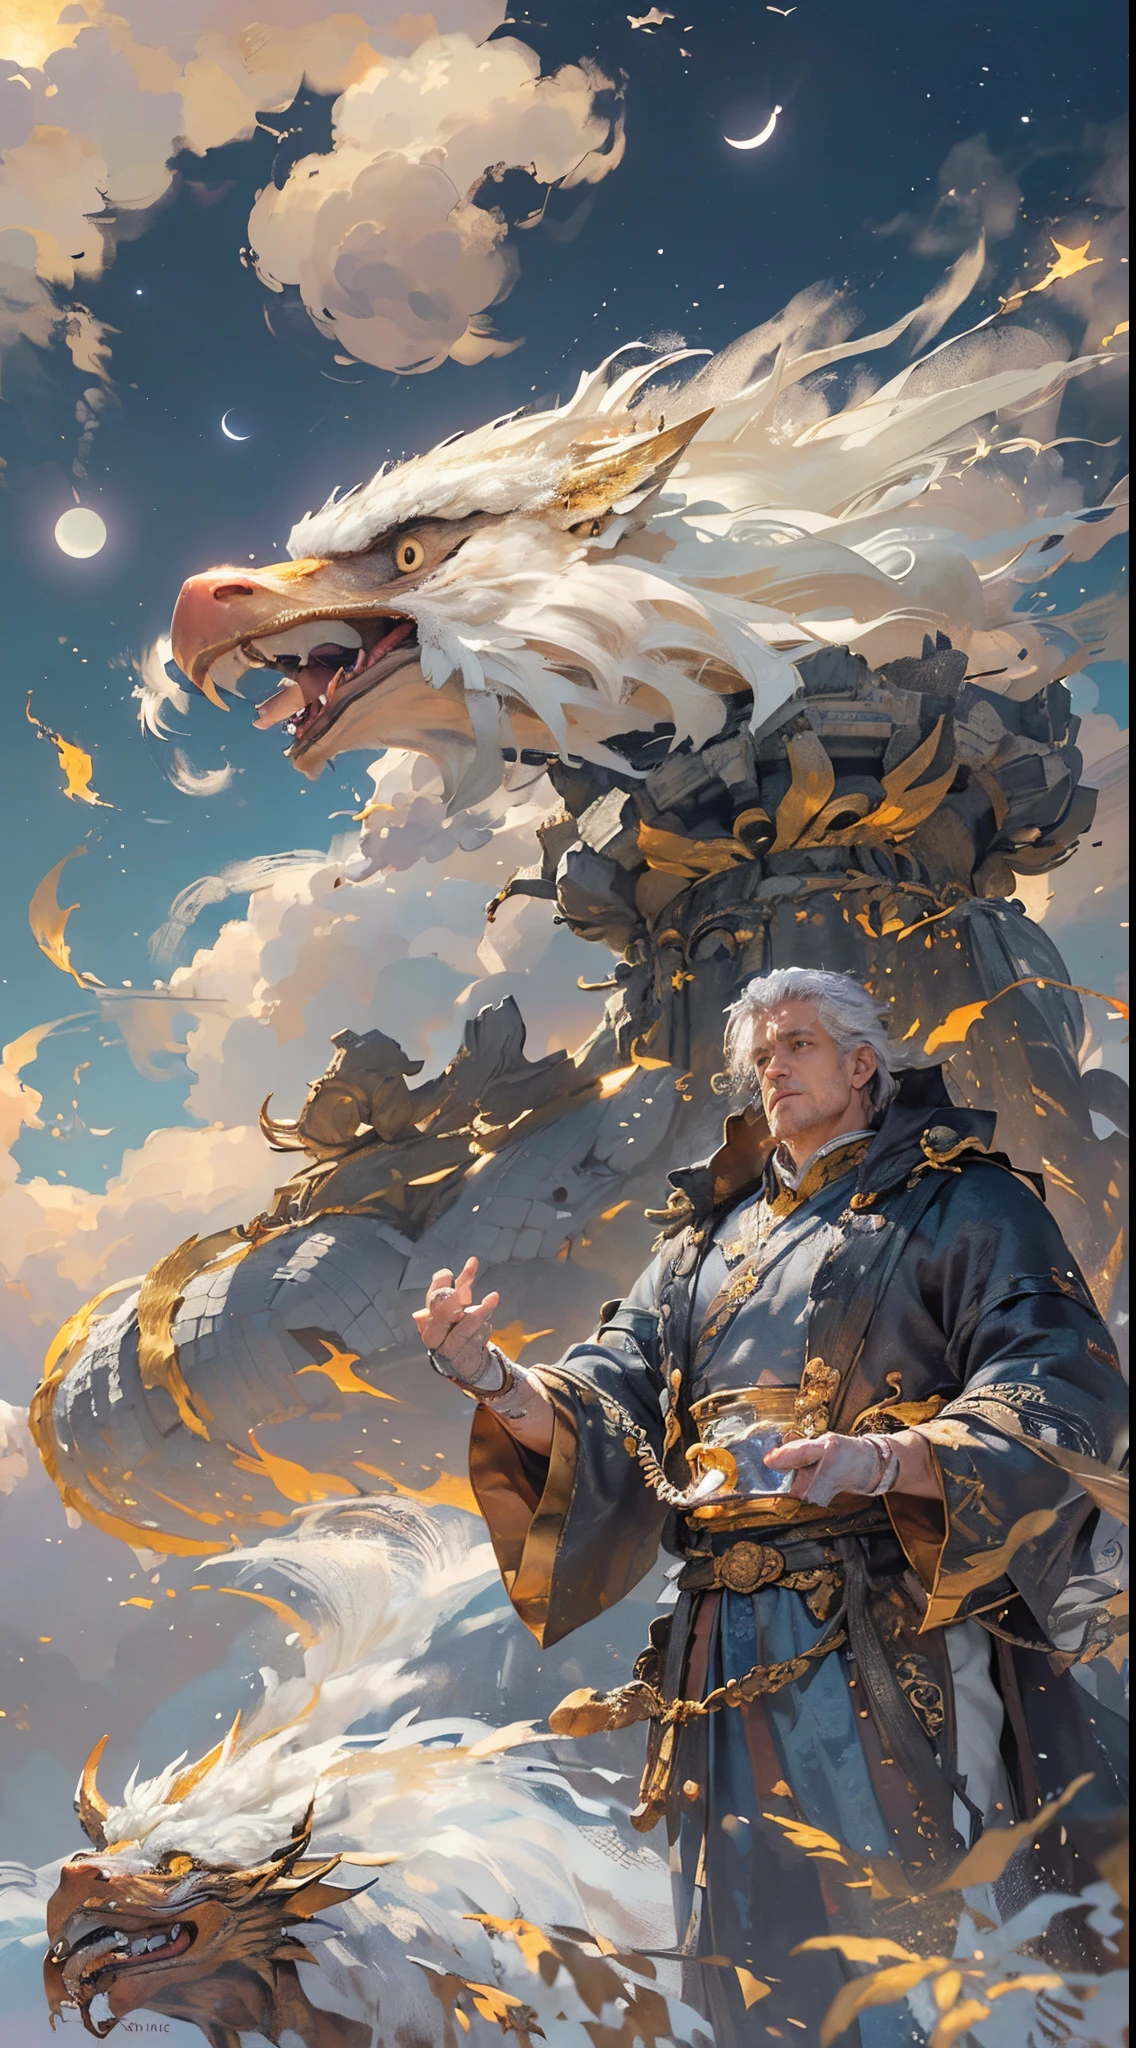 （(His works have won many awards, With incredible details, textures and maximum detail，(フォトリアリスティック))），Describing people and dragons being together，（chinesedragon：1.6），（sky sky， Surrounded by clouds），（Chinese mythology：1.2），like a dream、Mito、high high quality、((big eagle,well-proportioned man))，((Big muscle man))，（Handsome face：1.4)，（Messy White Hair），(Anatomically correct limbs and physique:1.5), (Anatomically correct perspective and occlusion：1.5)，(Gender characteristics are very obvious：1.5)，(correct faces), ((add some scenes：Moon Night，temple ruins，A huge full moon lights up the night sky，(( (Complicated details:1.1), the complex background))， ((dynamic viewing angle+dynamic combination))，Correct anatomy，